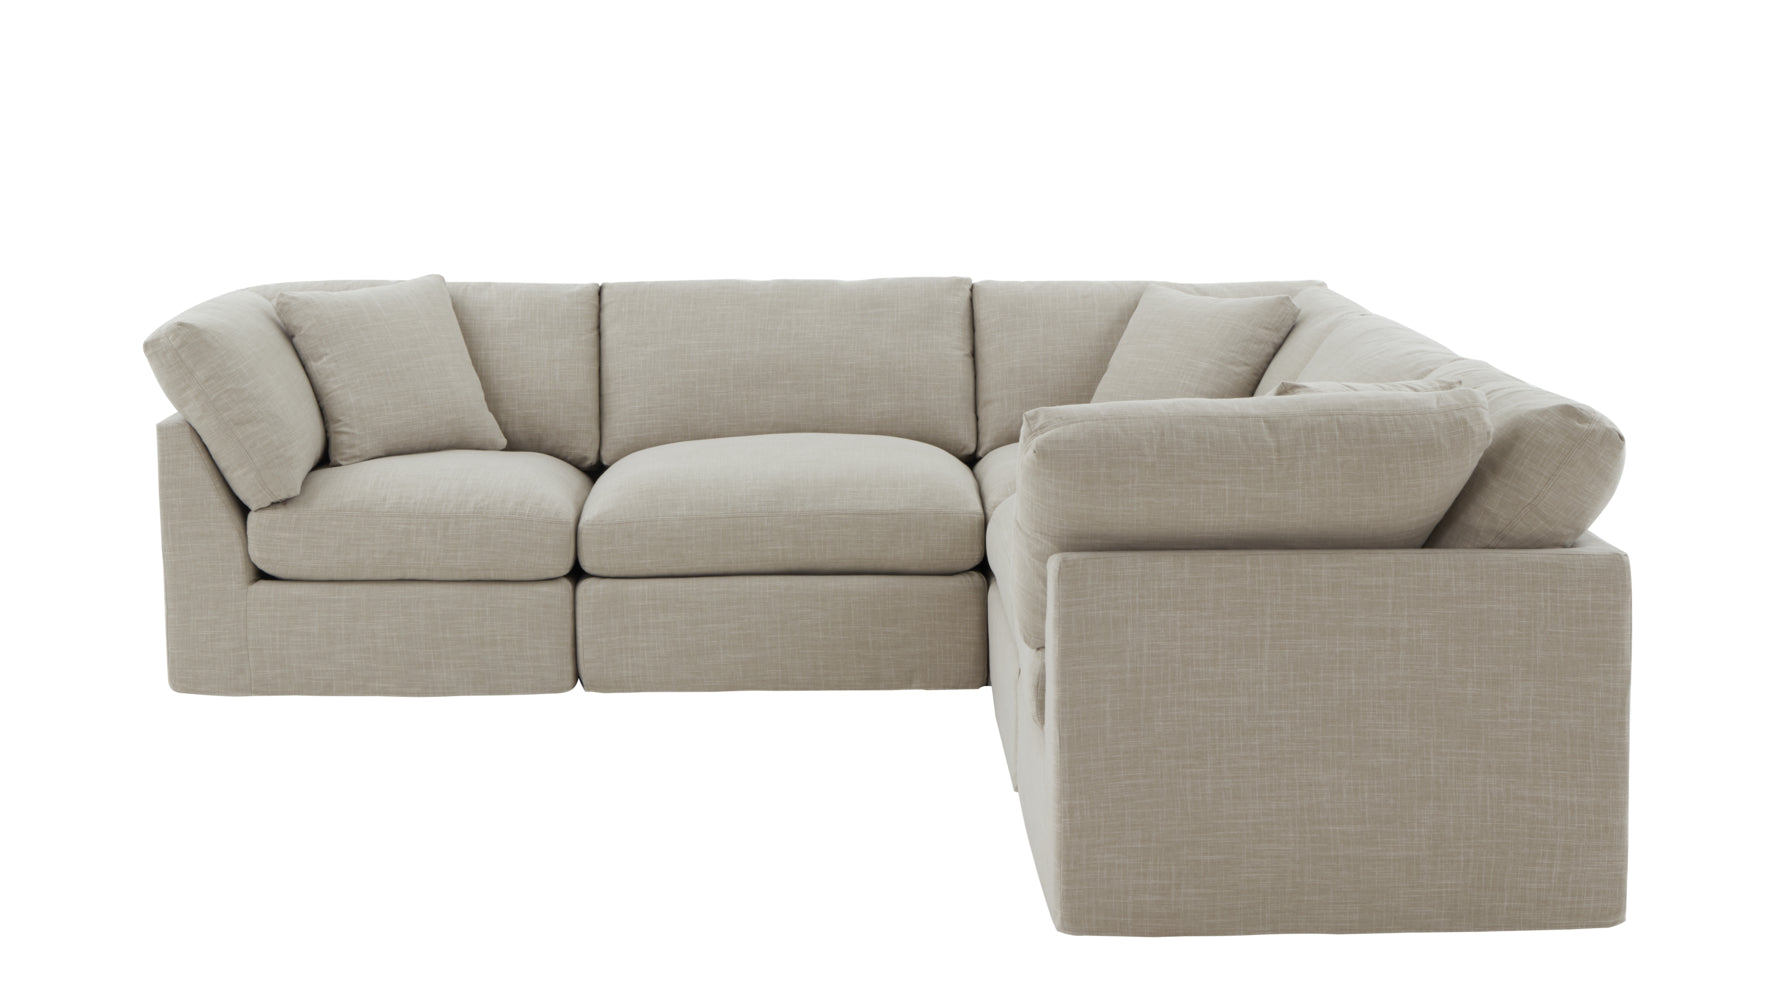 Get Together™ 5-Piece Modular Sectional Closed, Standard, Light Pebble - Image 7